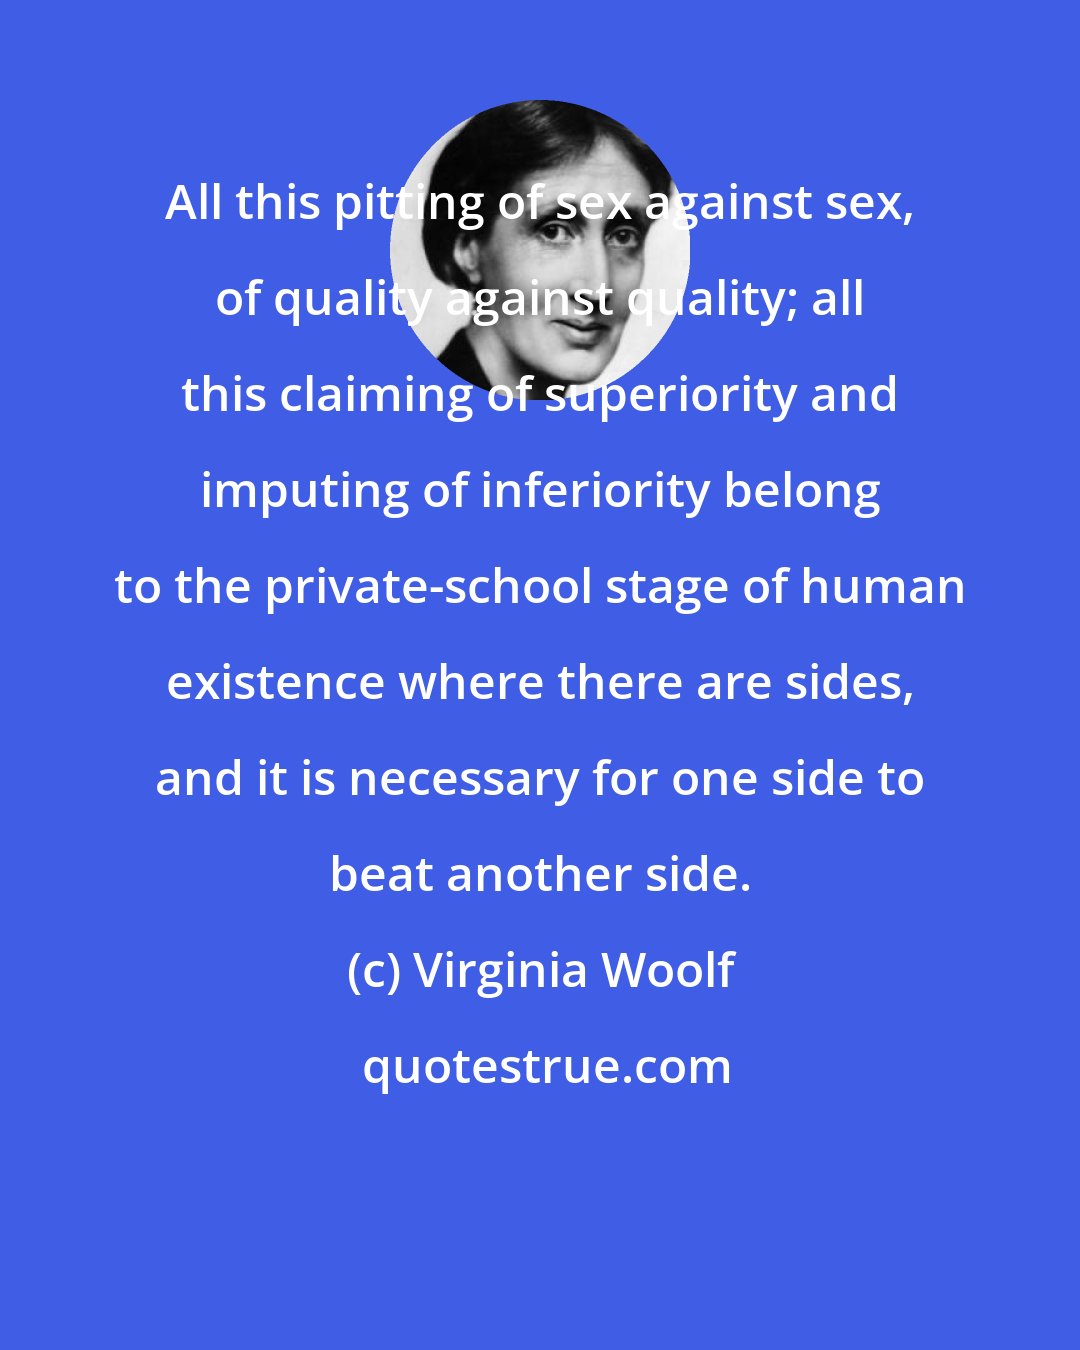 Virginia Woolf: All this pitting of sex against sex, of quality against quality; all this claiming of superiority and imputing of inferiority belong to the private-school stage of human existence where there are sides, and it is necessary for one side to beat another side.